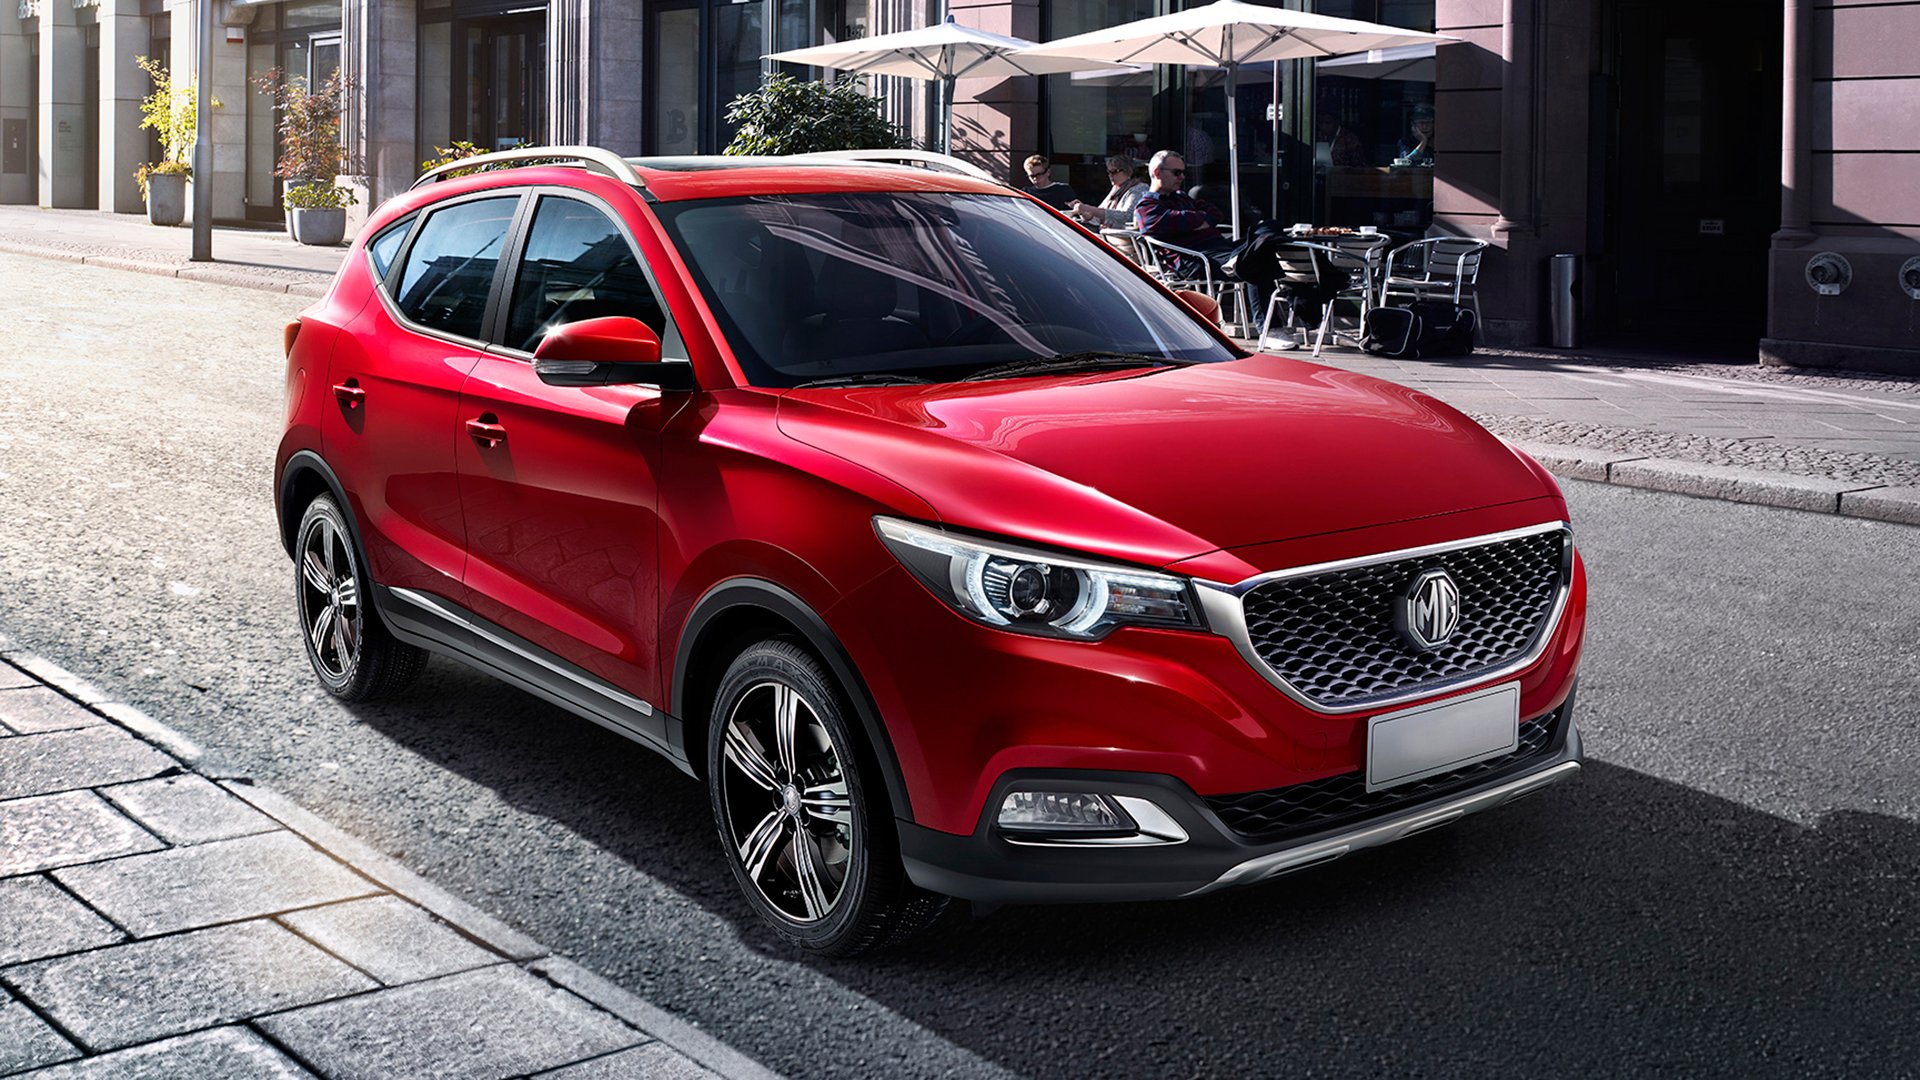 MG unveils new XS SUV at London Motor Show | AutoTrader